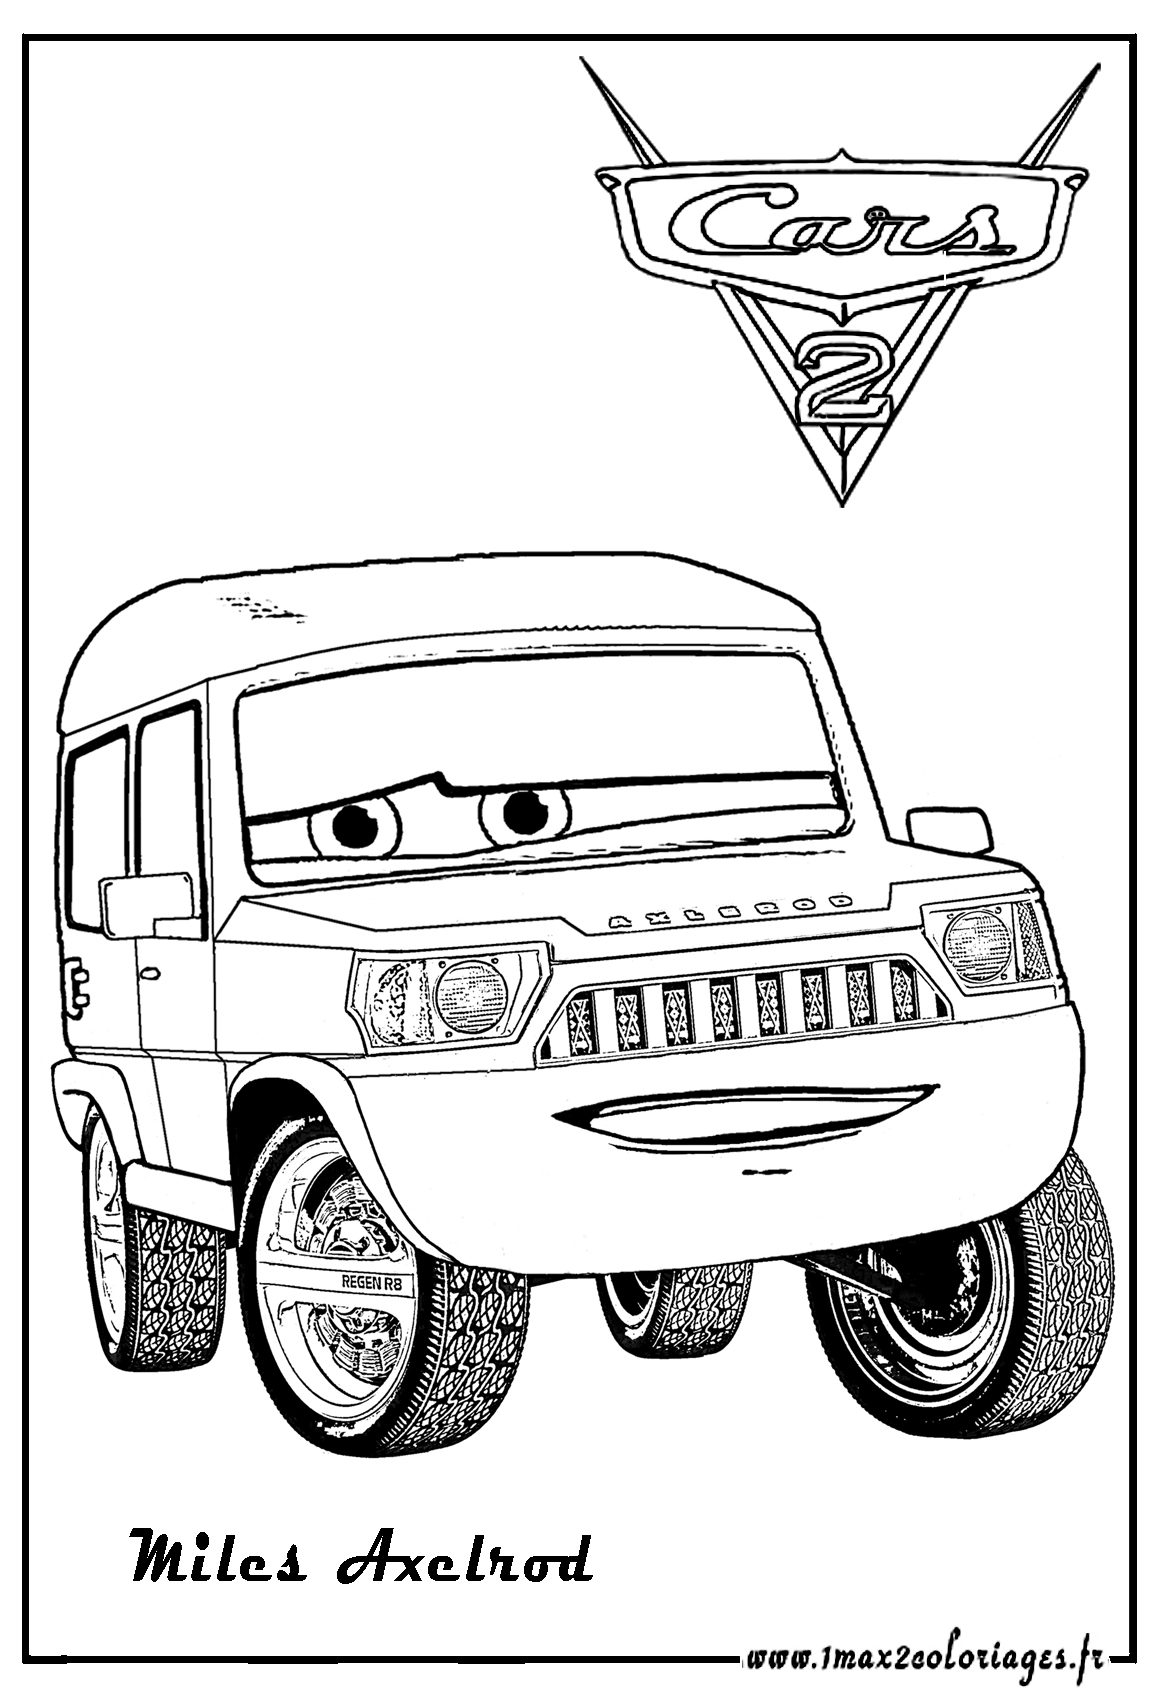 Cars and Cars 2 Coloring Pages